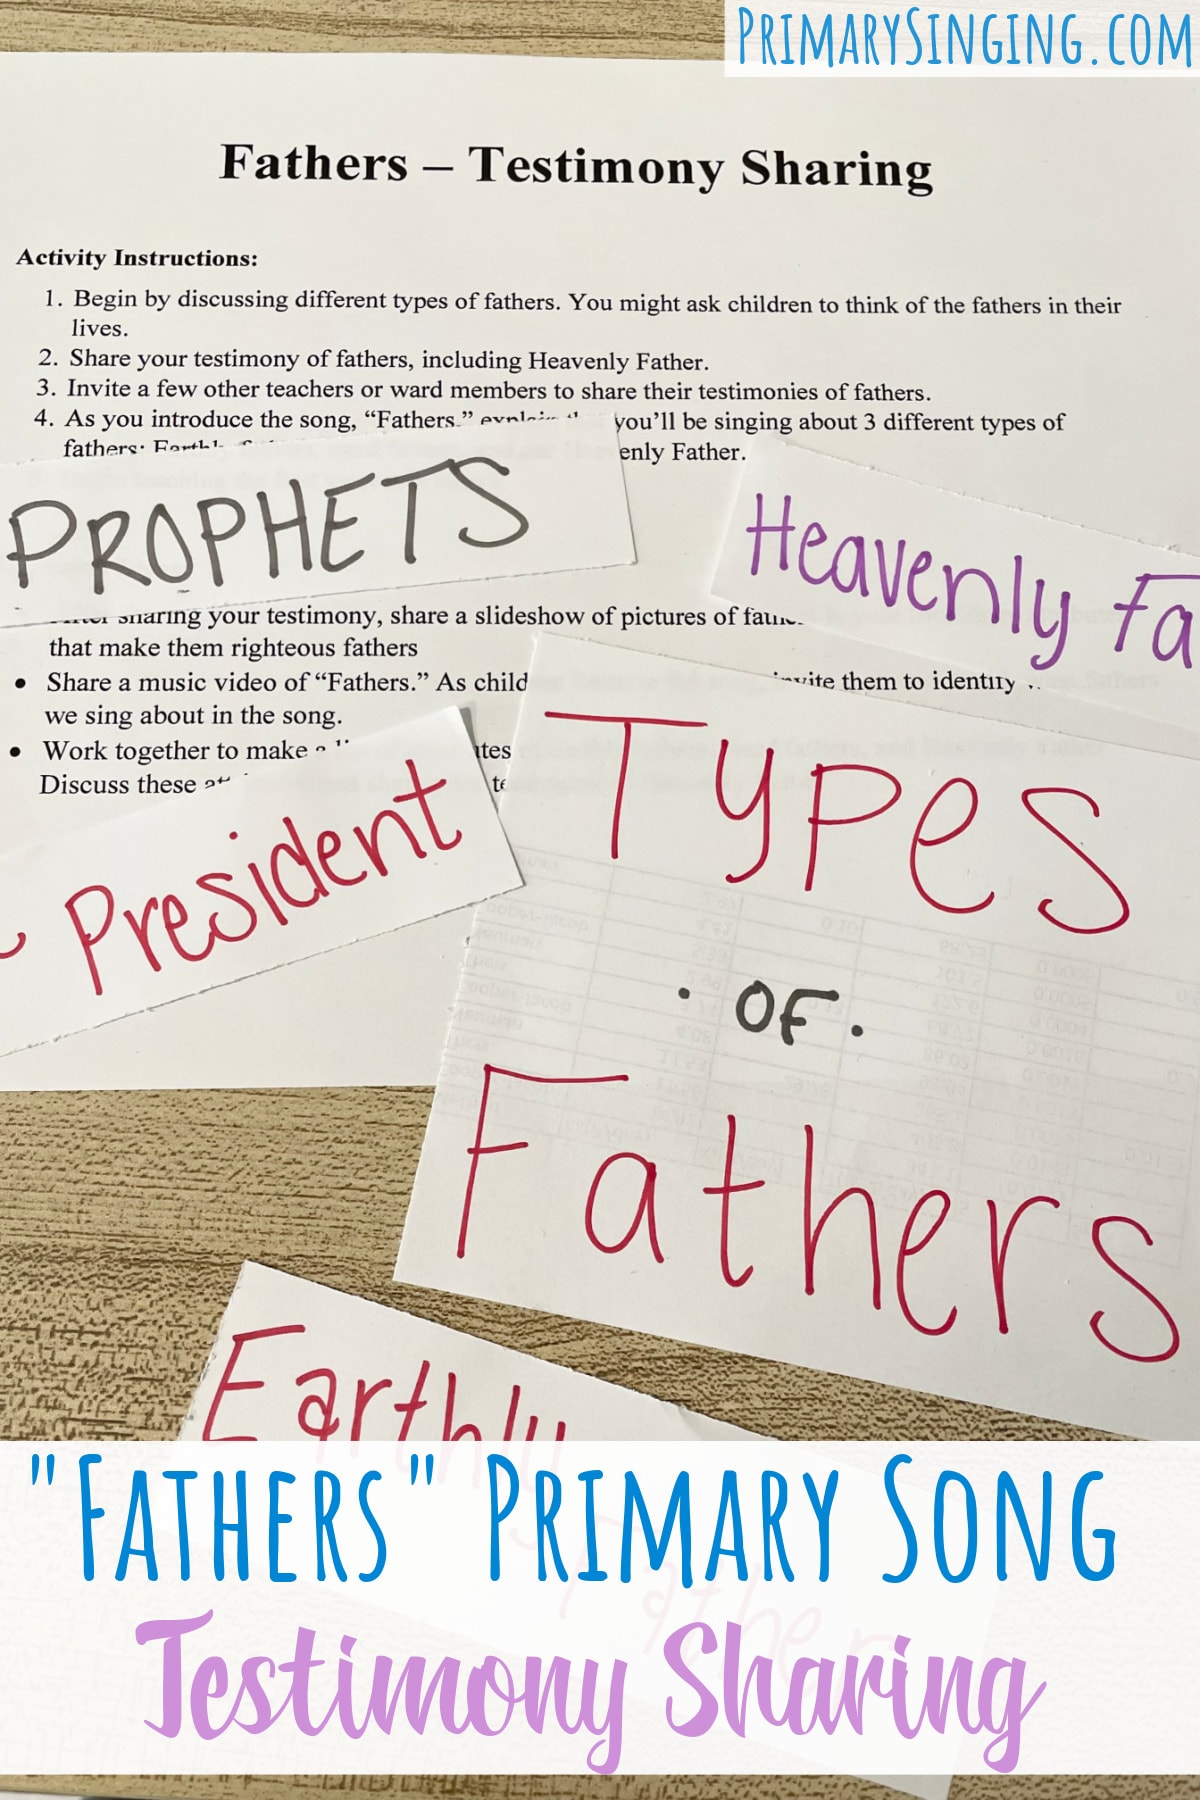 Fathers Testimony Sharing Intro Lesson Easy singing time ideas for Primary Music Leaders Fathers Primary Testimony Sharing 1